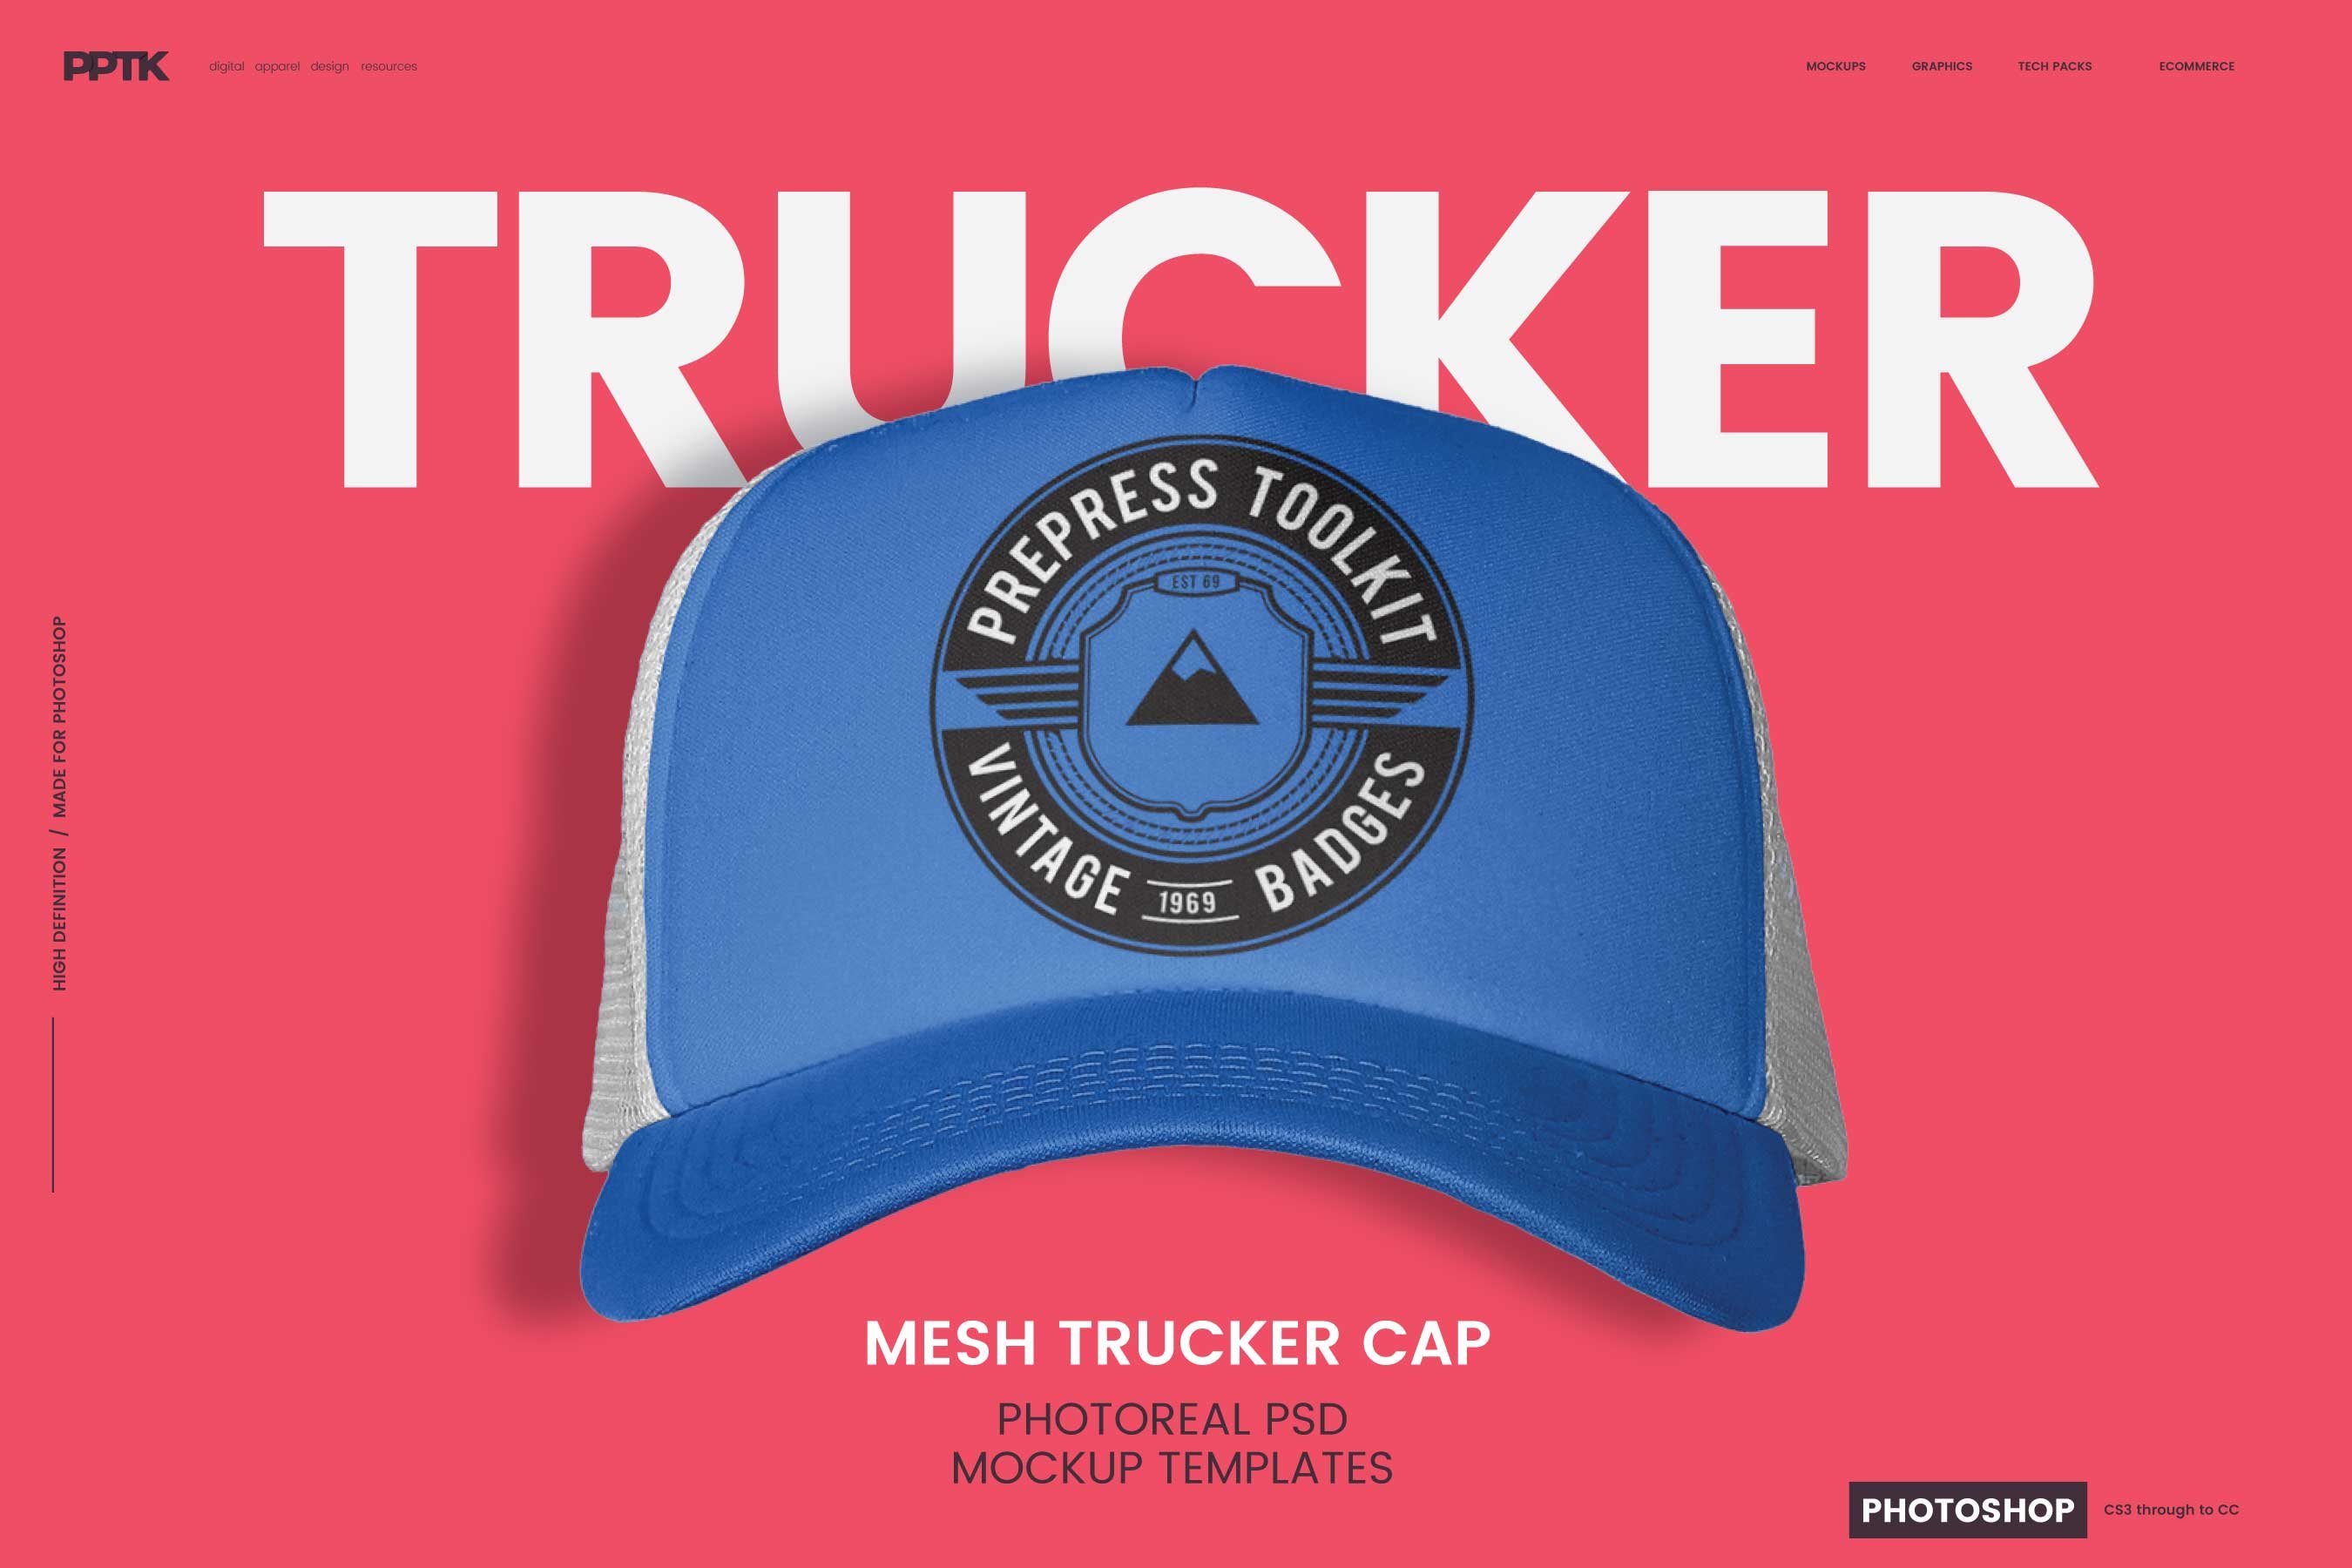 Trucker Cap Photoshop Template cover image.